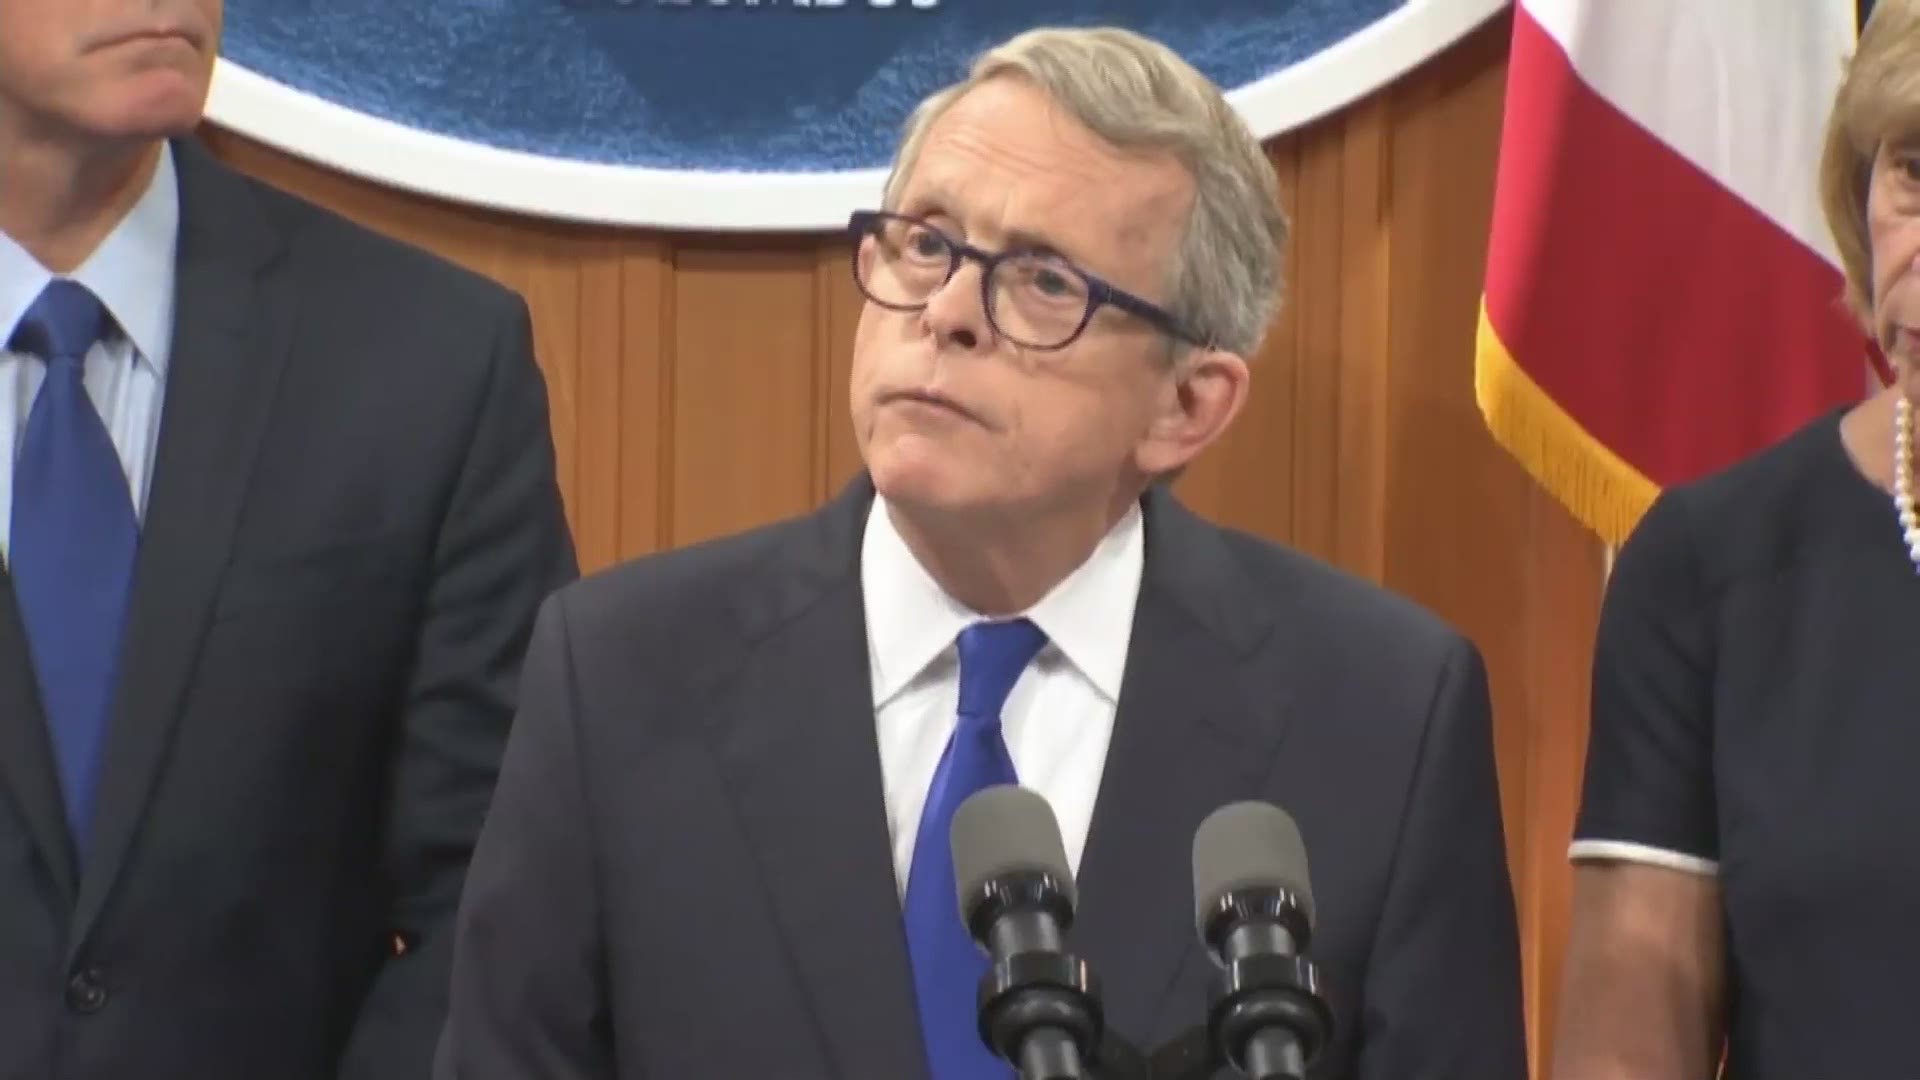 Aug. 6, 2019: After facing chants of 'do something' while addressing a vigil for the Dayton mass shooting earlier this week, Ohio Gov. Mike DeWine has crafted a plan to reduce gun violence in the state. He announced details of his multi-step proposal from the Ohio Statehouse on Tuesday morning. One of the areas of focus includes background checks.